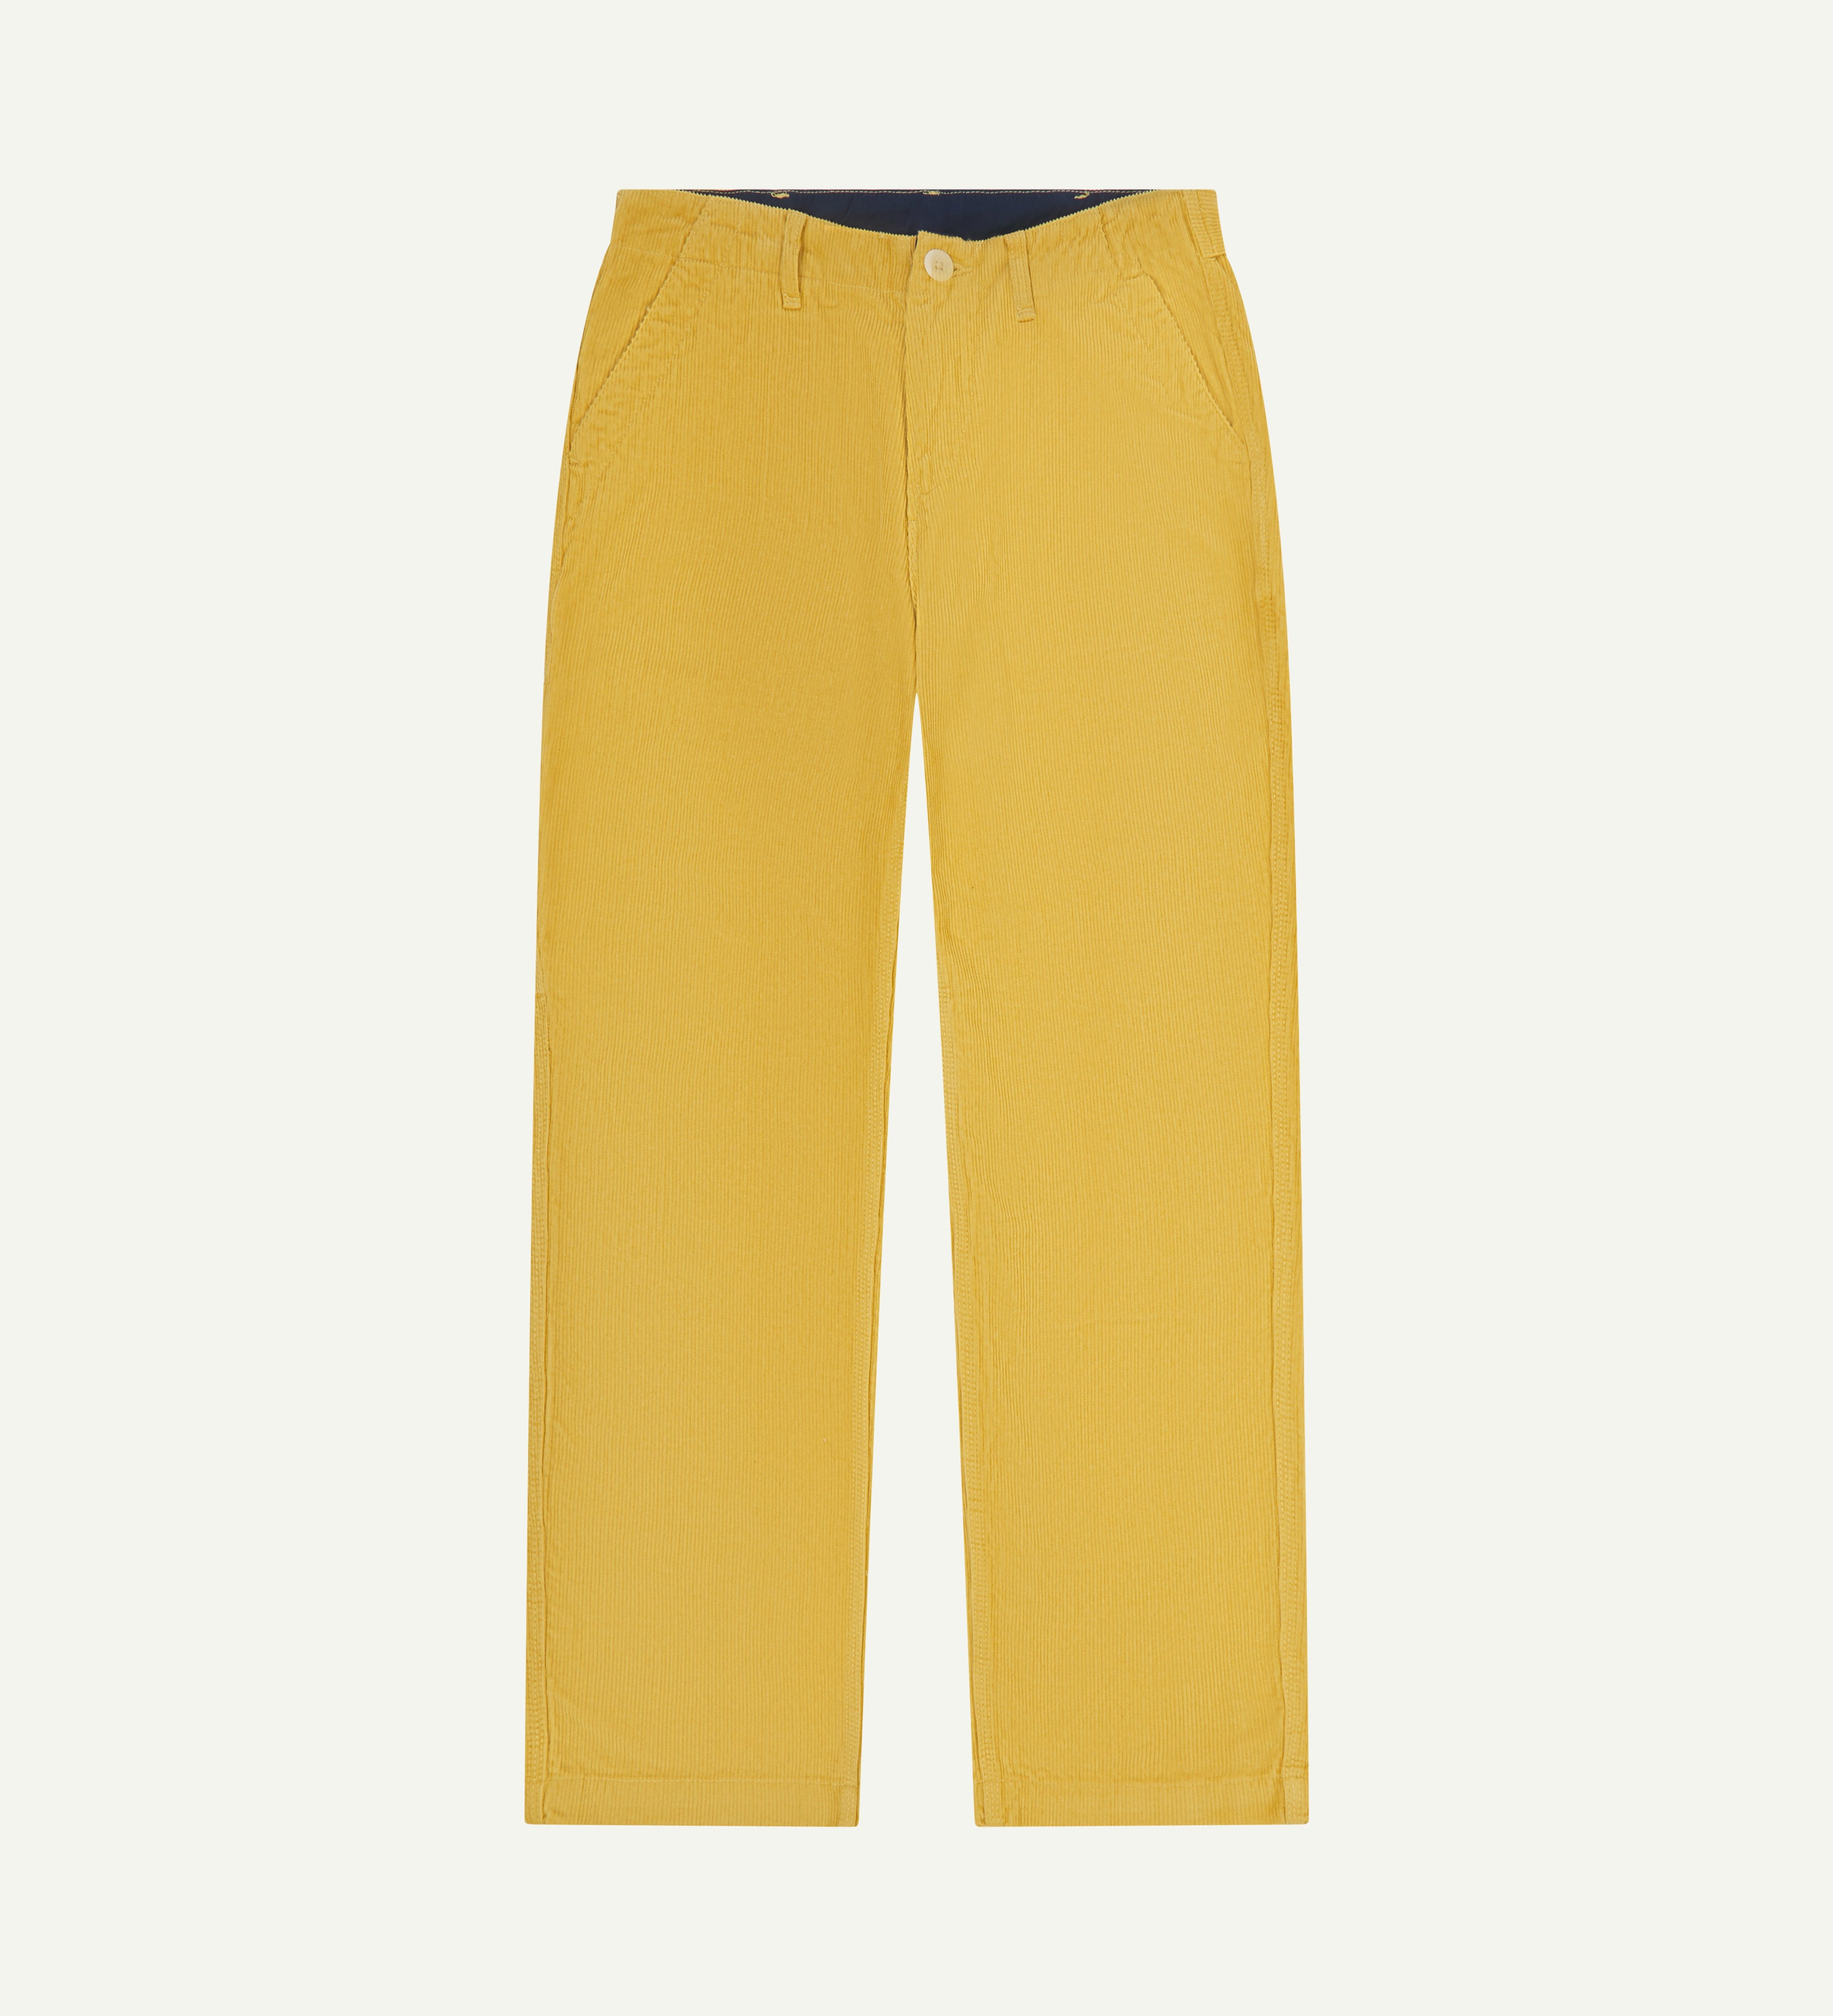 Uskees #5012 men's organic cord 'citronella-yellow' casual trousers with a view of adjustable waistband with corozo button detailing.